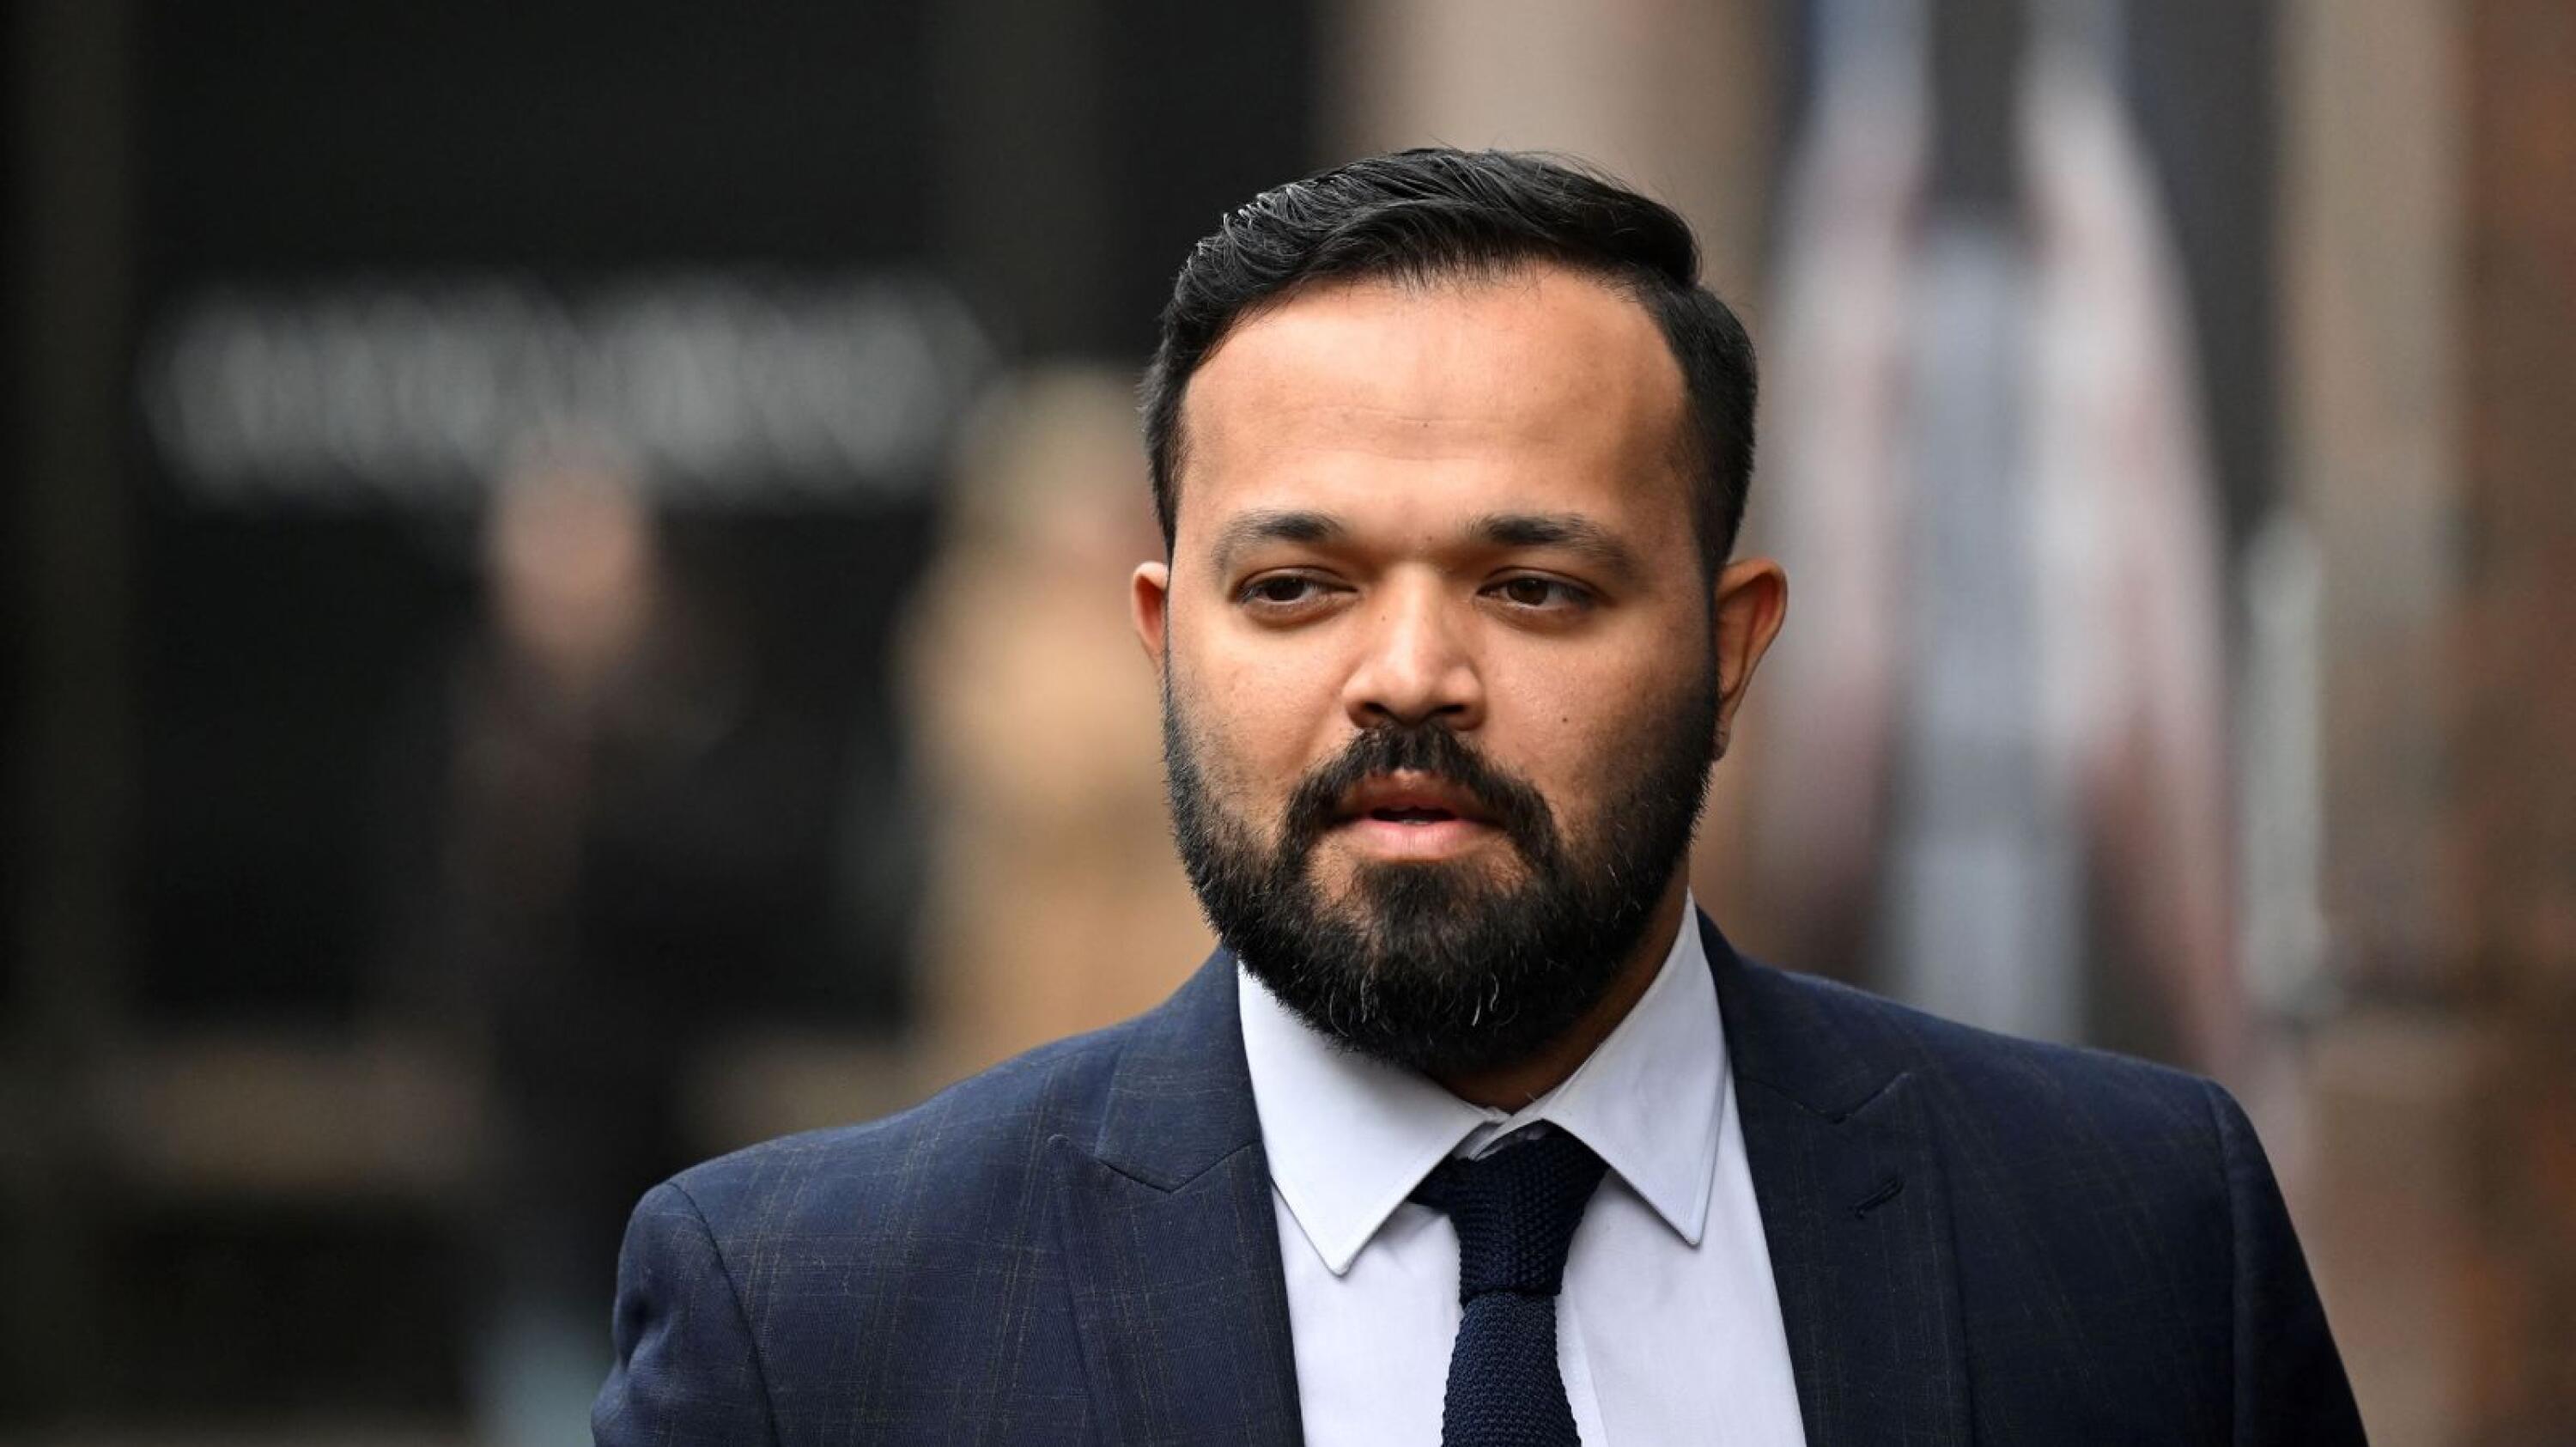 Former cricketer Azeem Rafiq arrives to attend a Cricket Discipline Commission hearing, relating to allegations of racism at Yorkshire County Cricket Club, in London